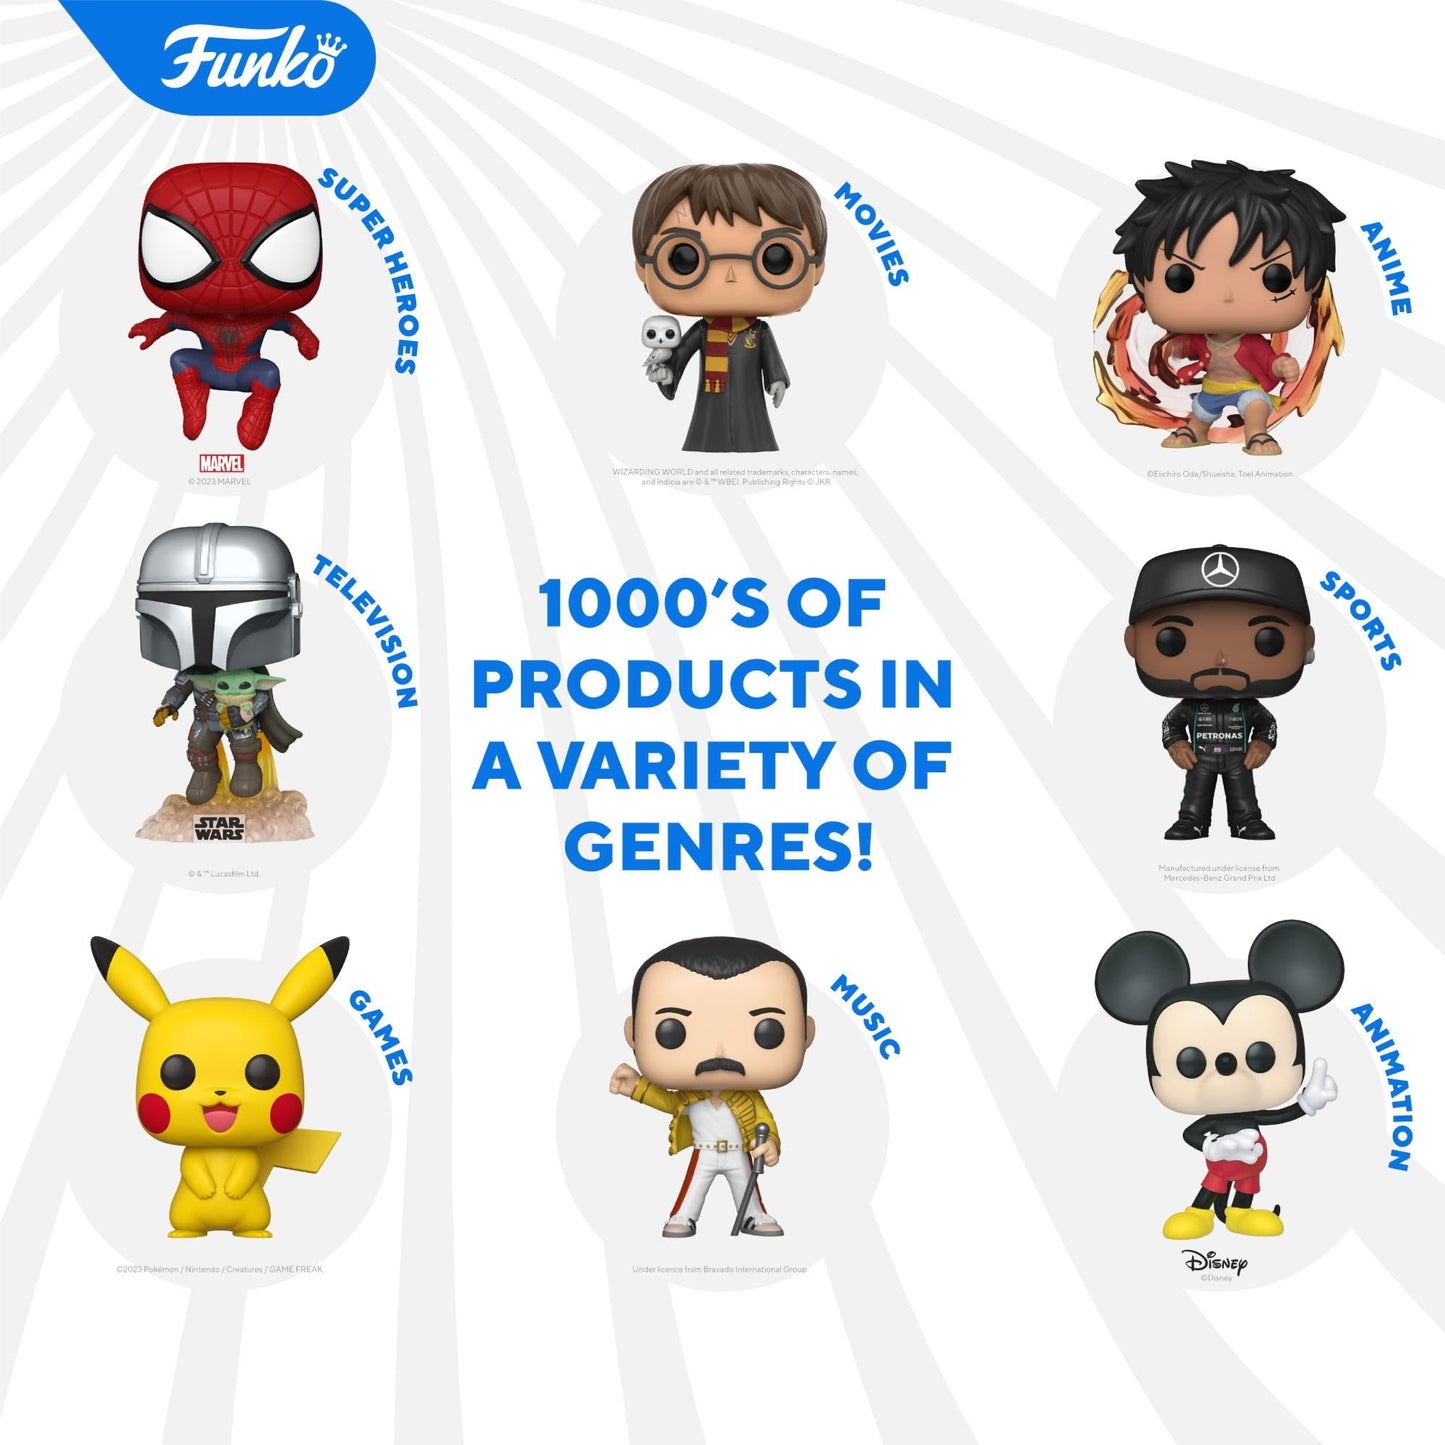 Funko Bitty Pop!: Toy Story Mini Collectible Toys 4-Pack - Jessie, Bullseye, Hamm & Mystery Chase Figure (Styles May Vary) - amzGamess